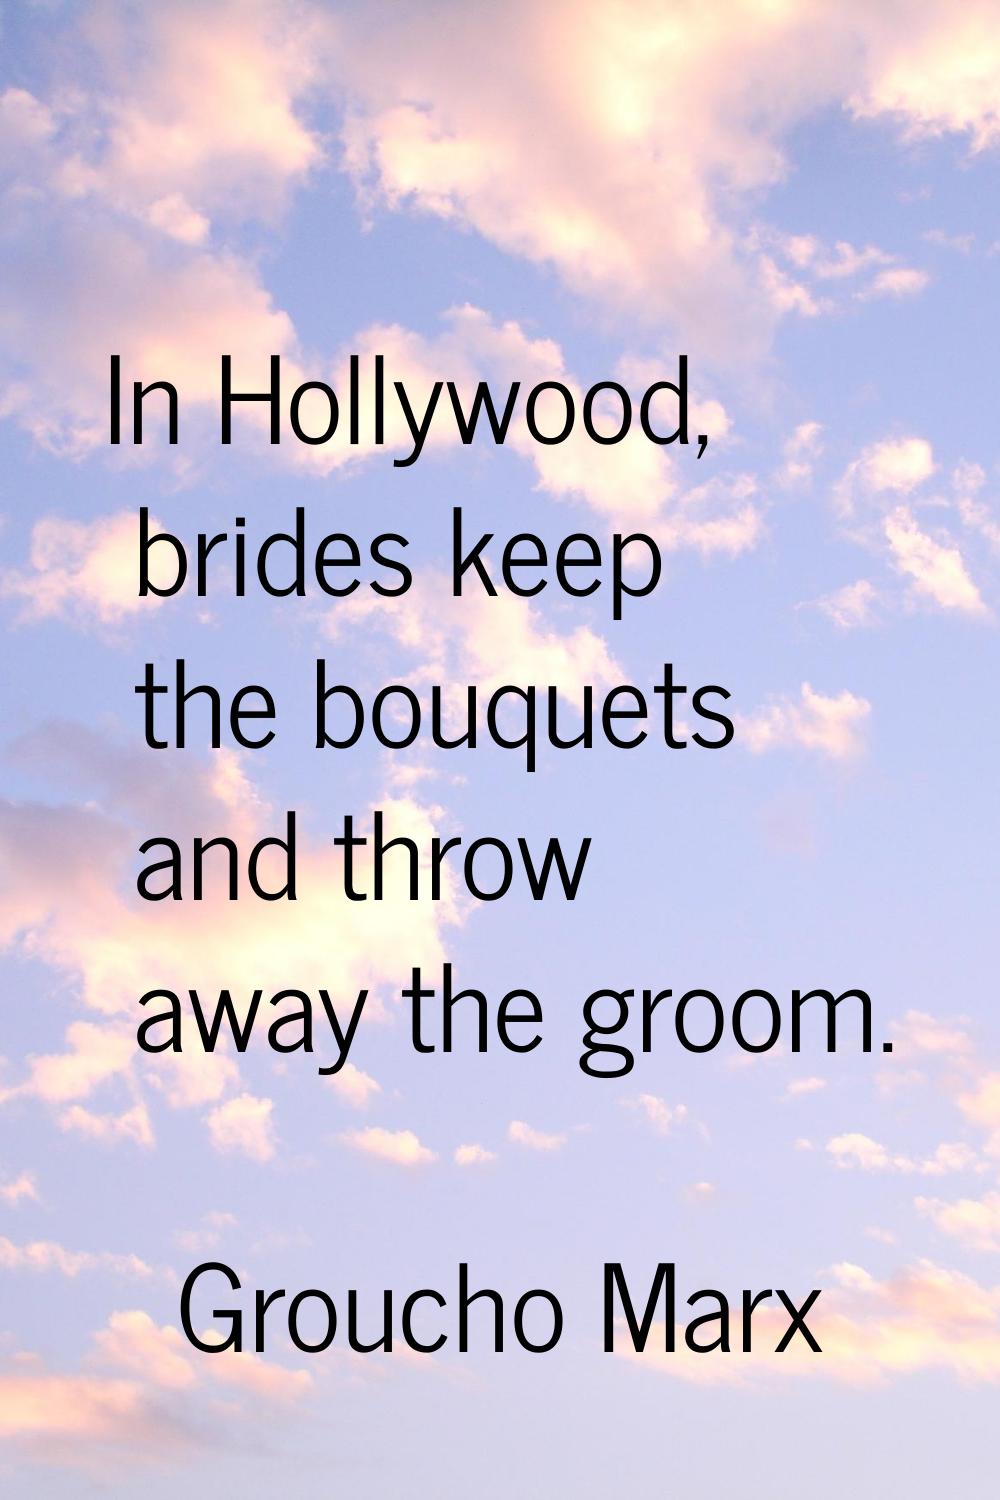 In Hollywood, brides keep the bouquets and throw away the groom.